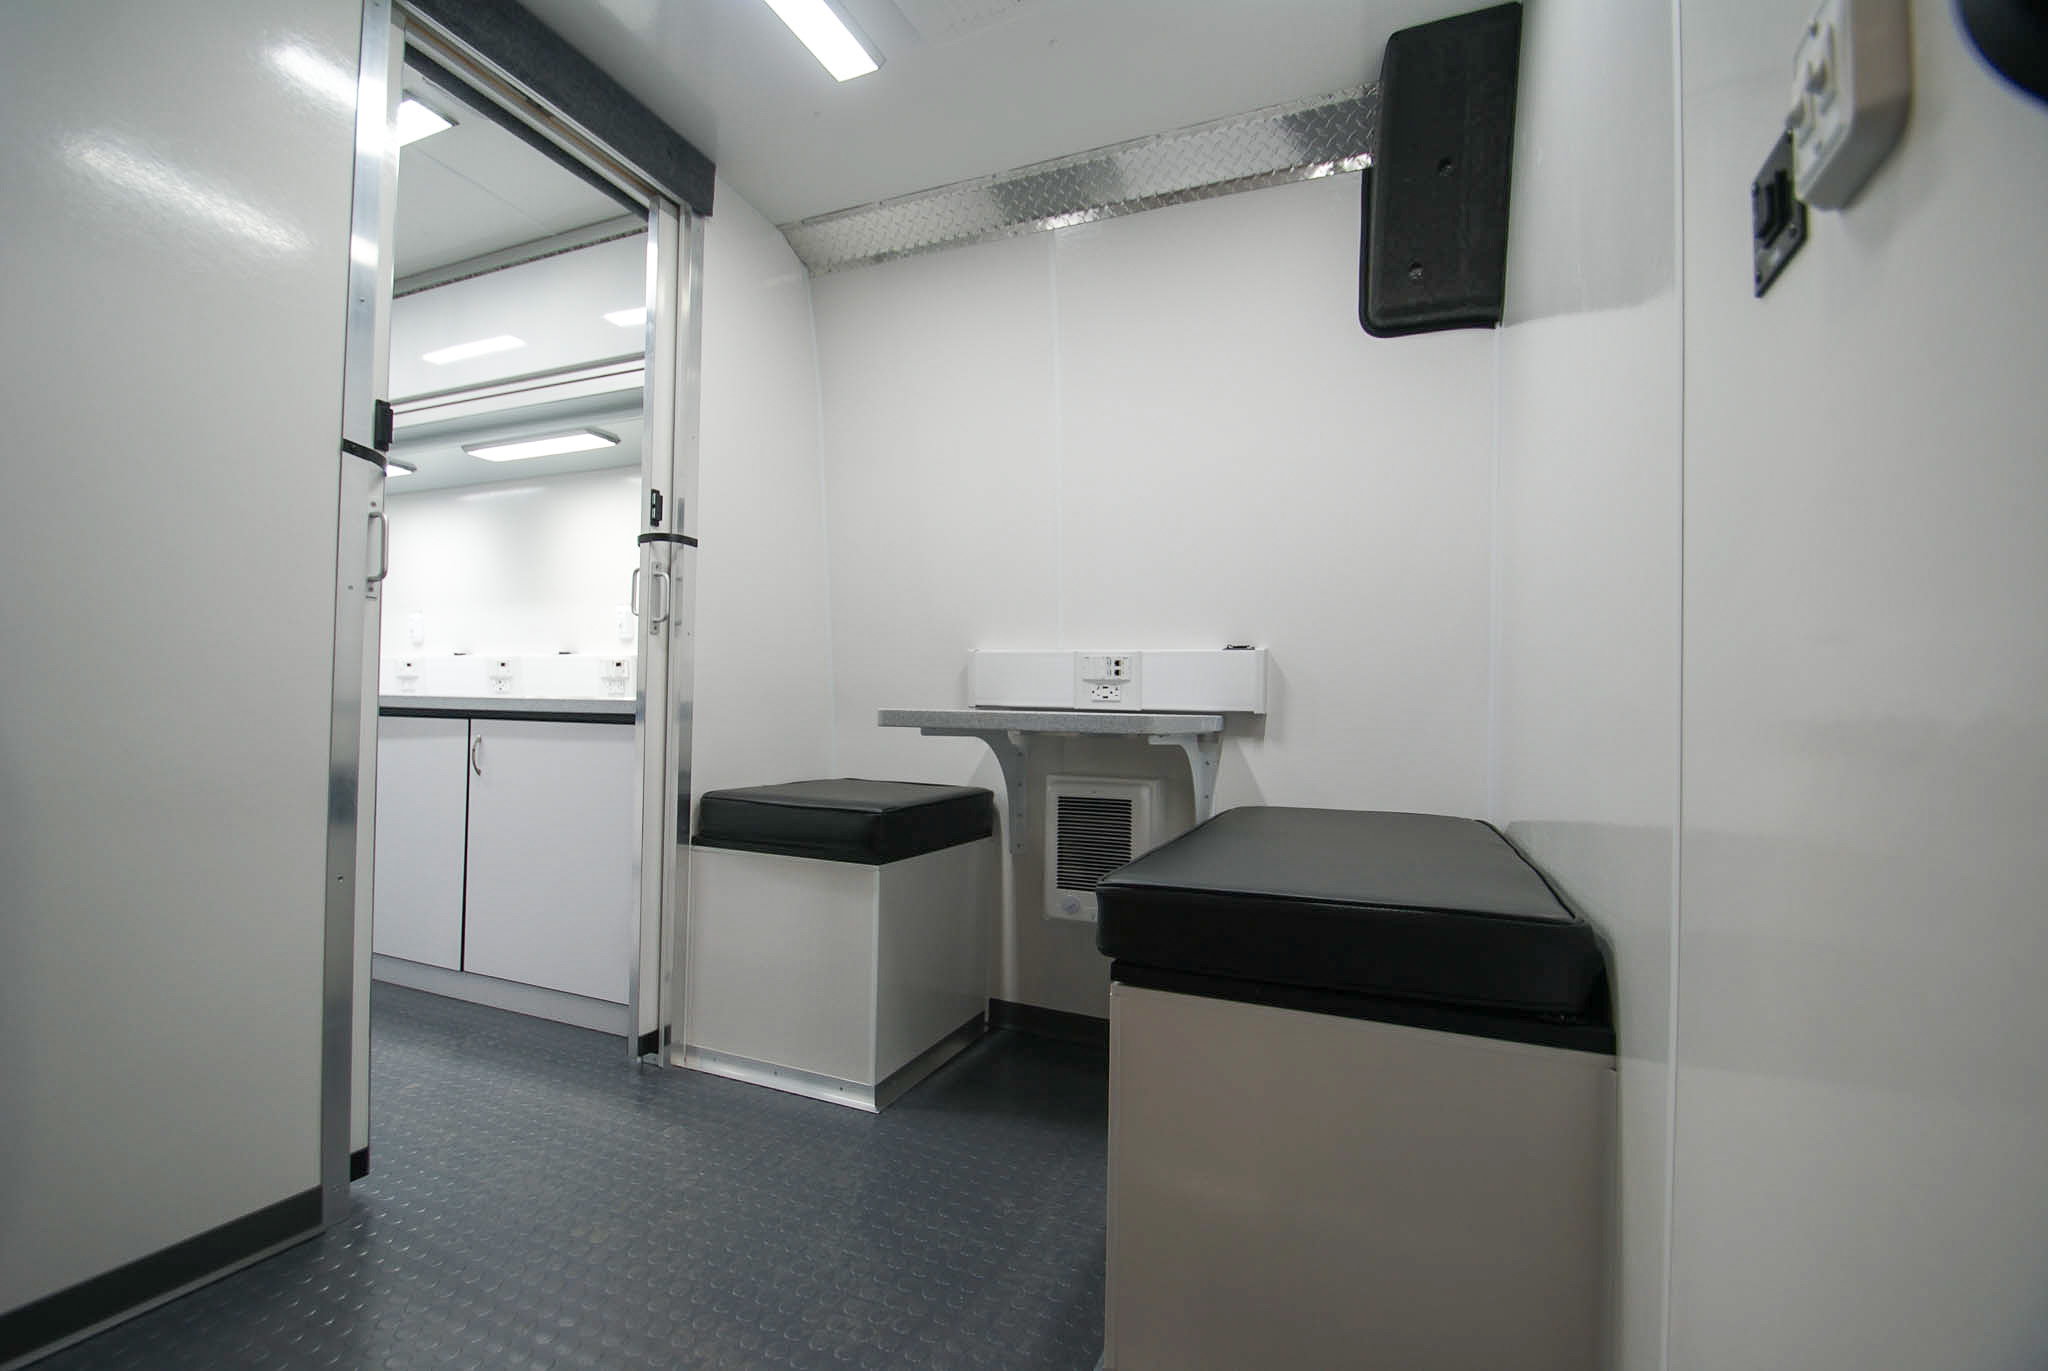 The front room of the Mobile Medical Exam sprinter as viewed from the front entrance. You can see the waiting area. The door to the back room is open, so you can also see the counters and sink.